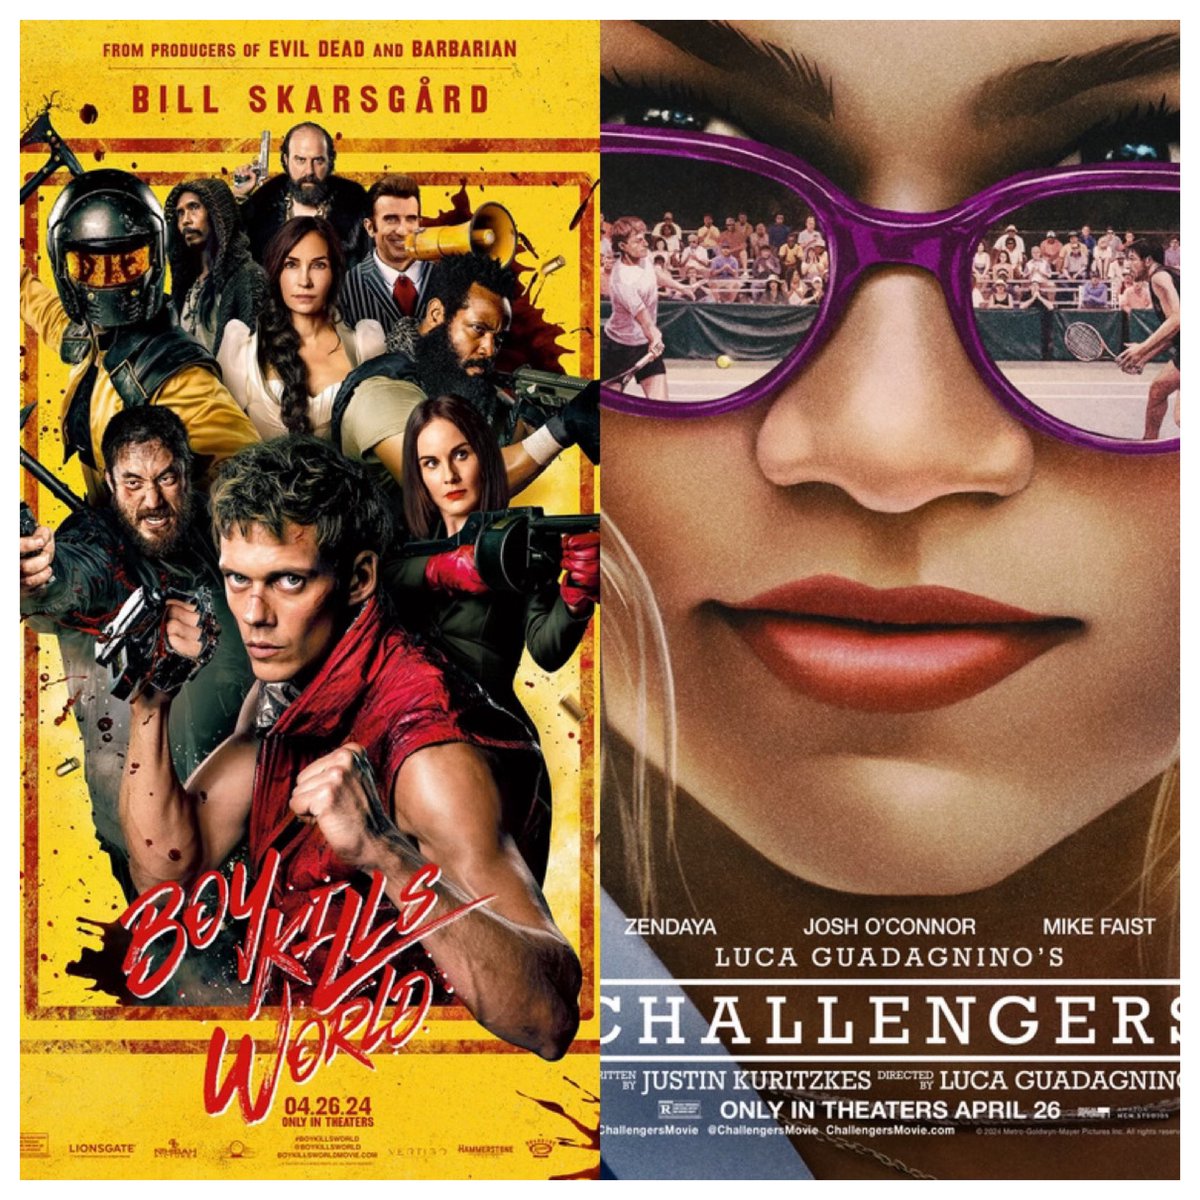 What do you plan on watching this weekend?

#BoyKillsWorld and #Challengers are in theaters 

#WreckLeaguePodcast